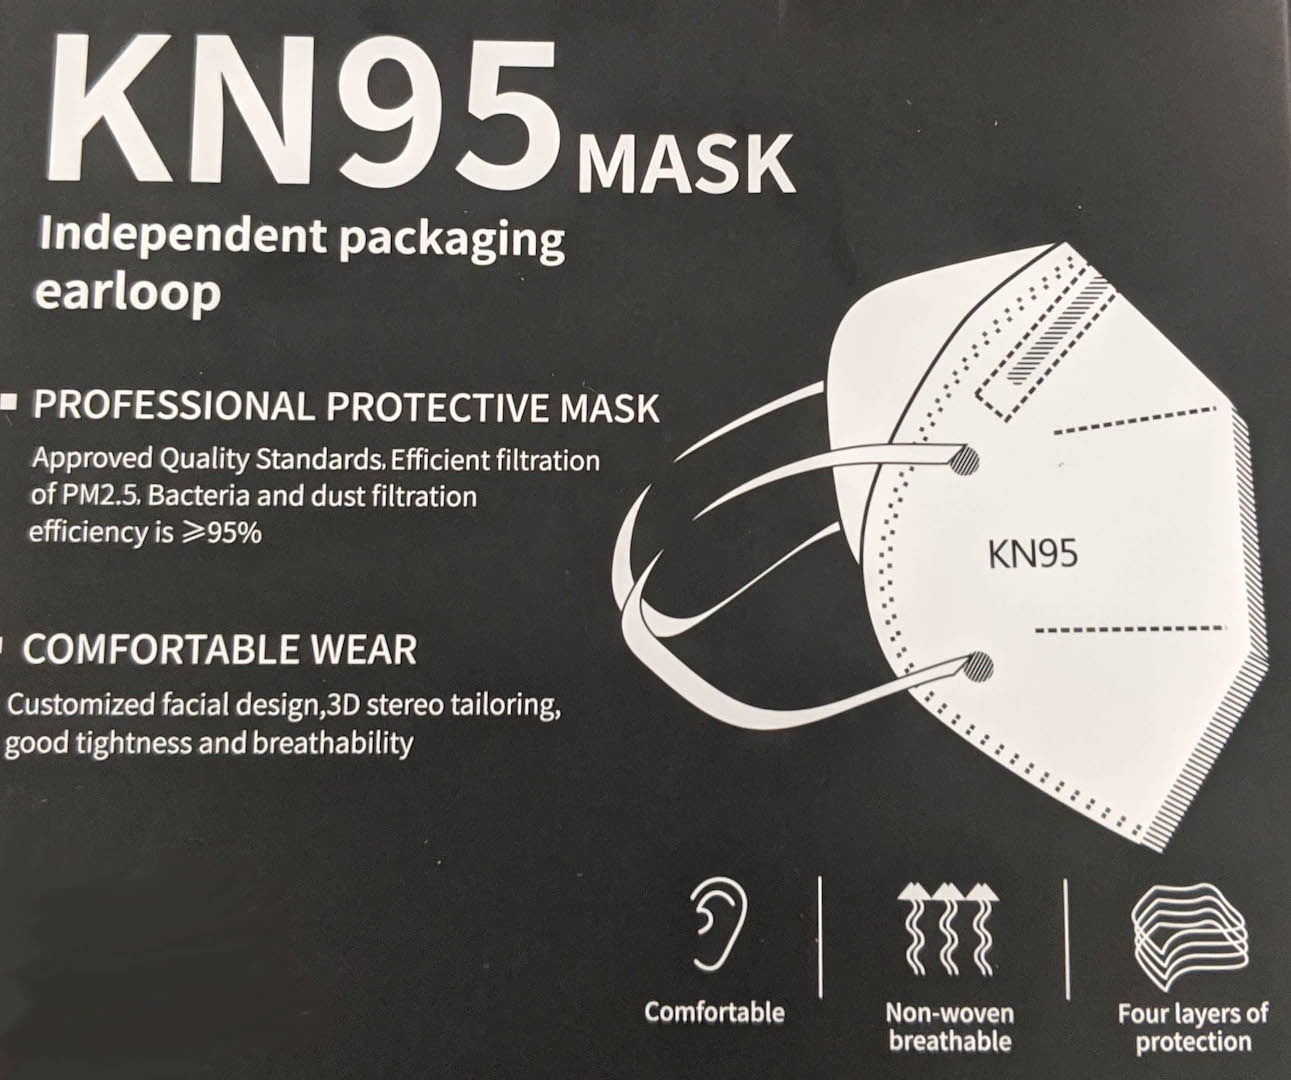 KN95 mask from Source International, a reliable supplier of PPE